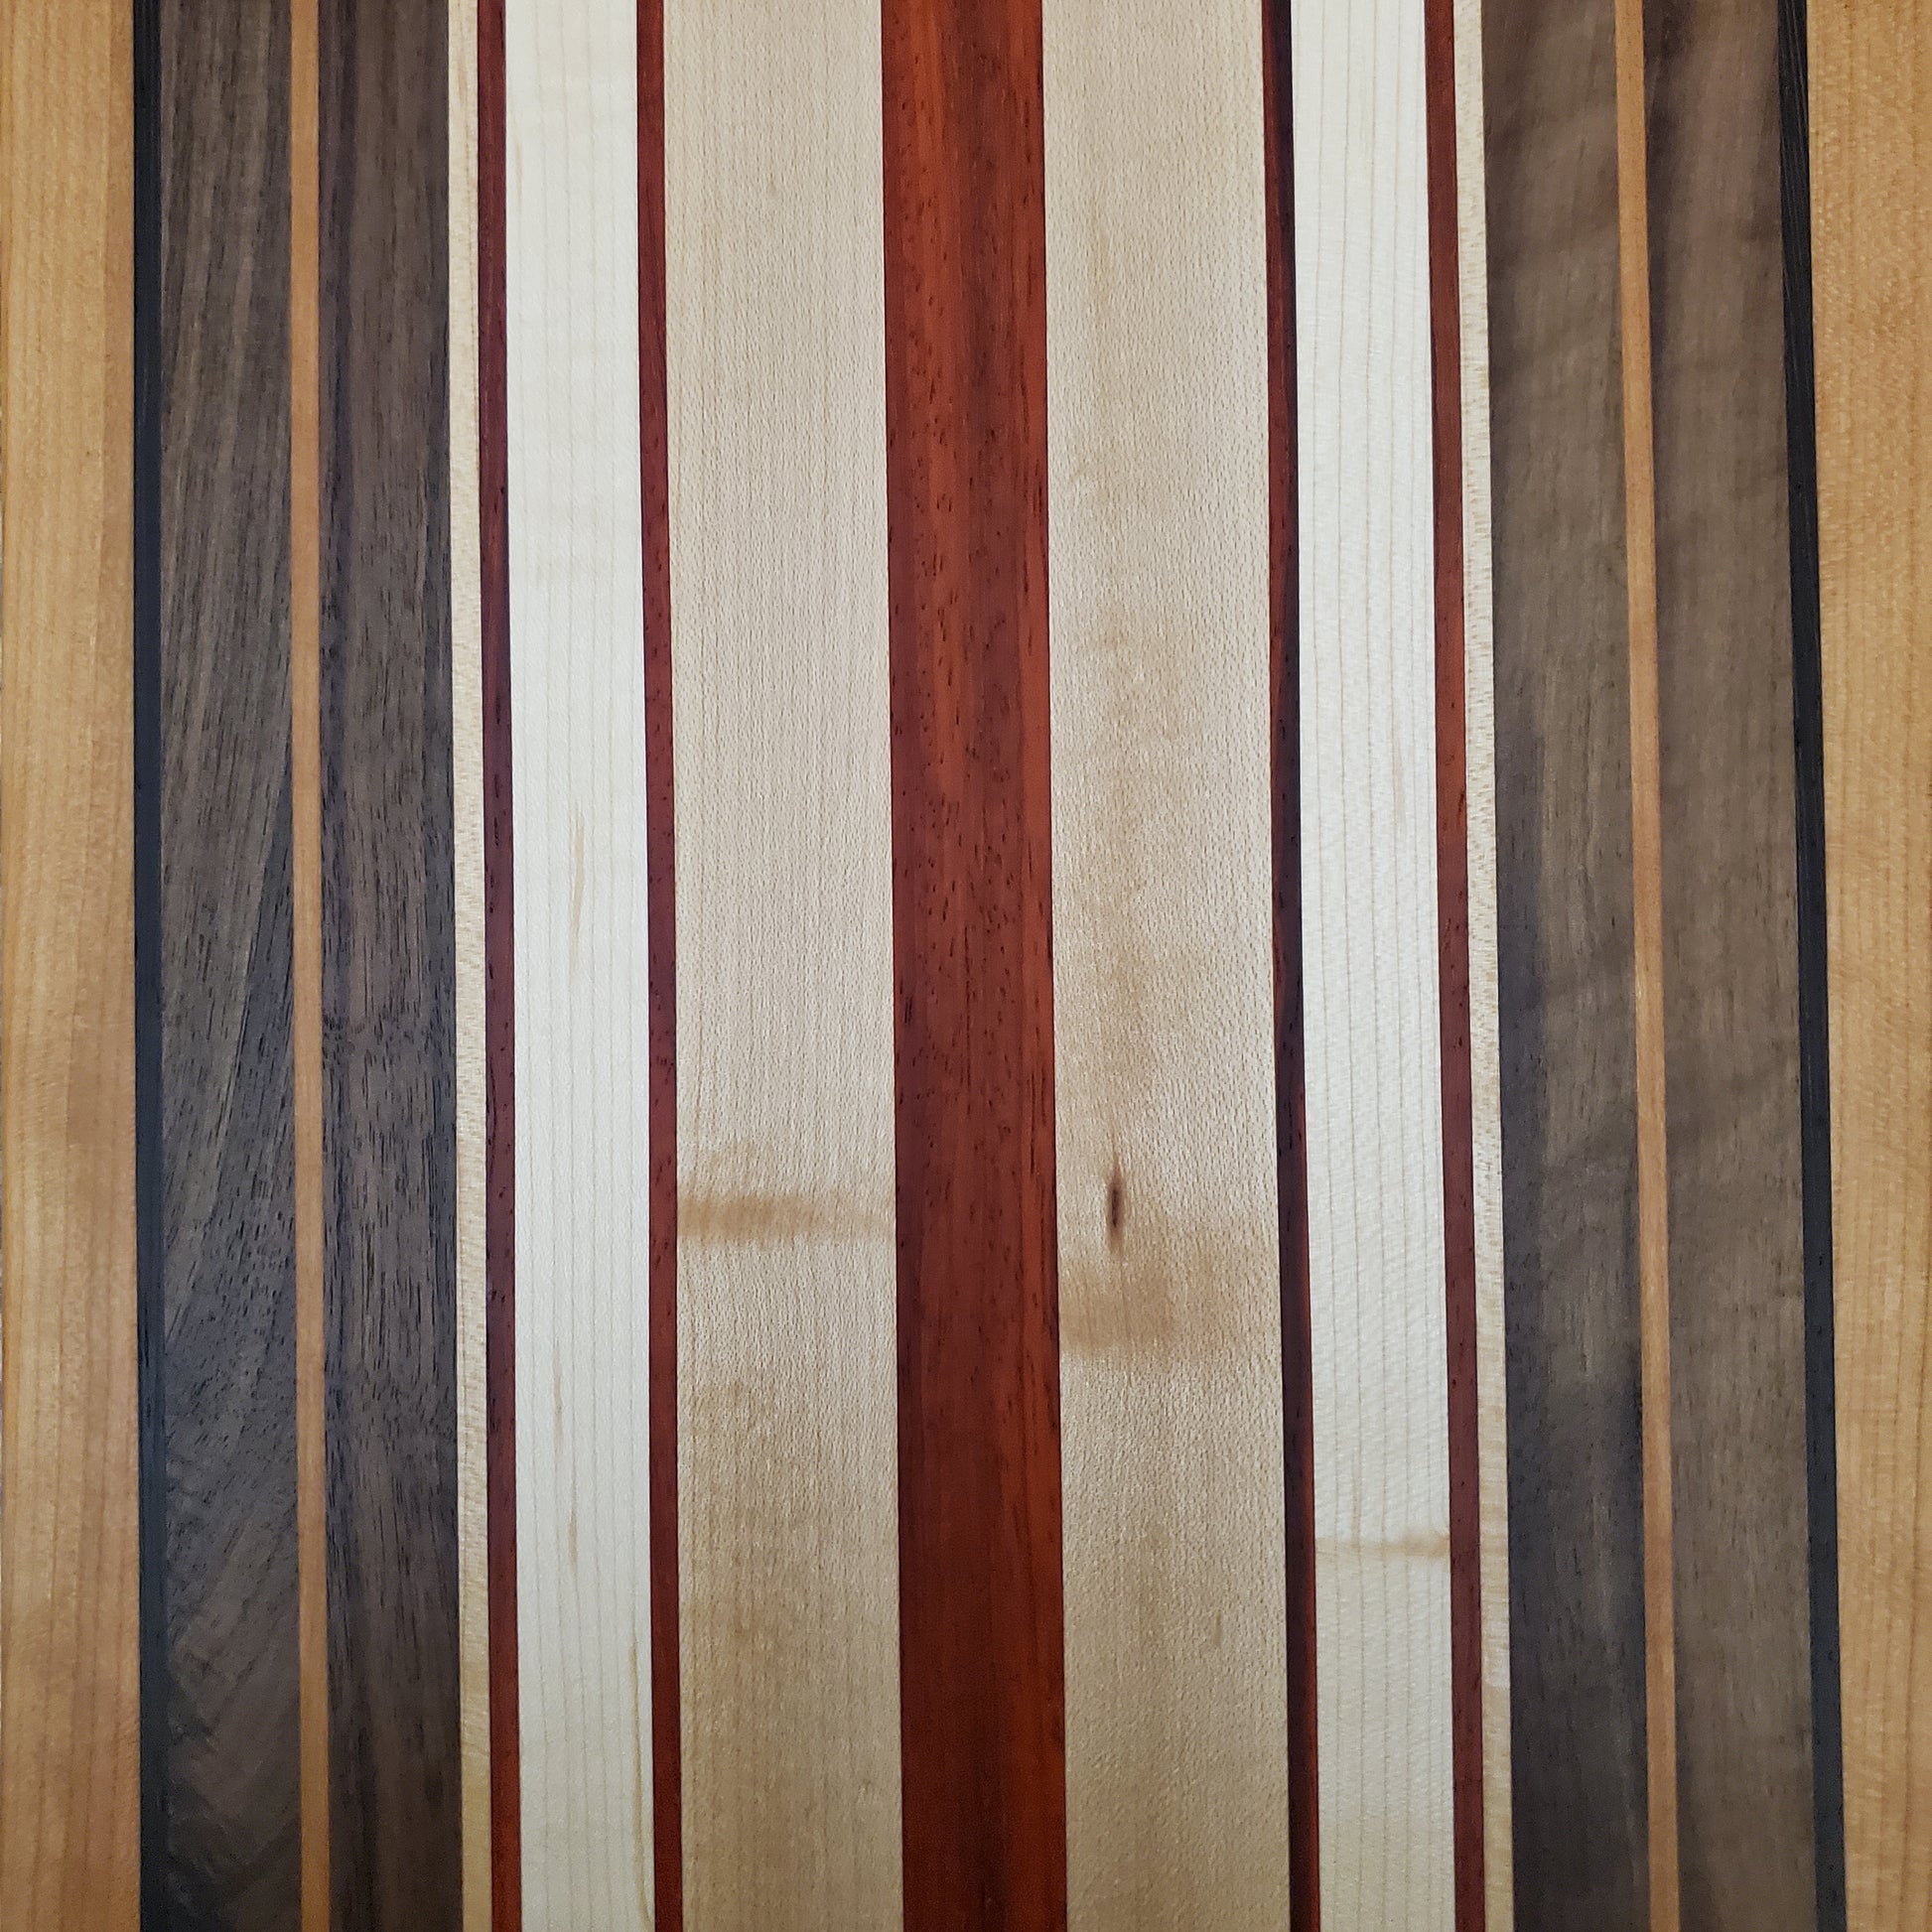 Signature Series Pumpkin Spice cutting board made from maple, walnut, cherry, padauk, and wenge by Lone Wolf Wood Designs